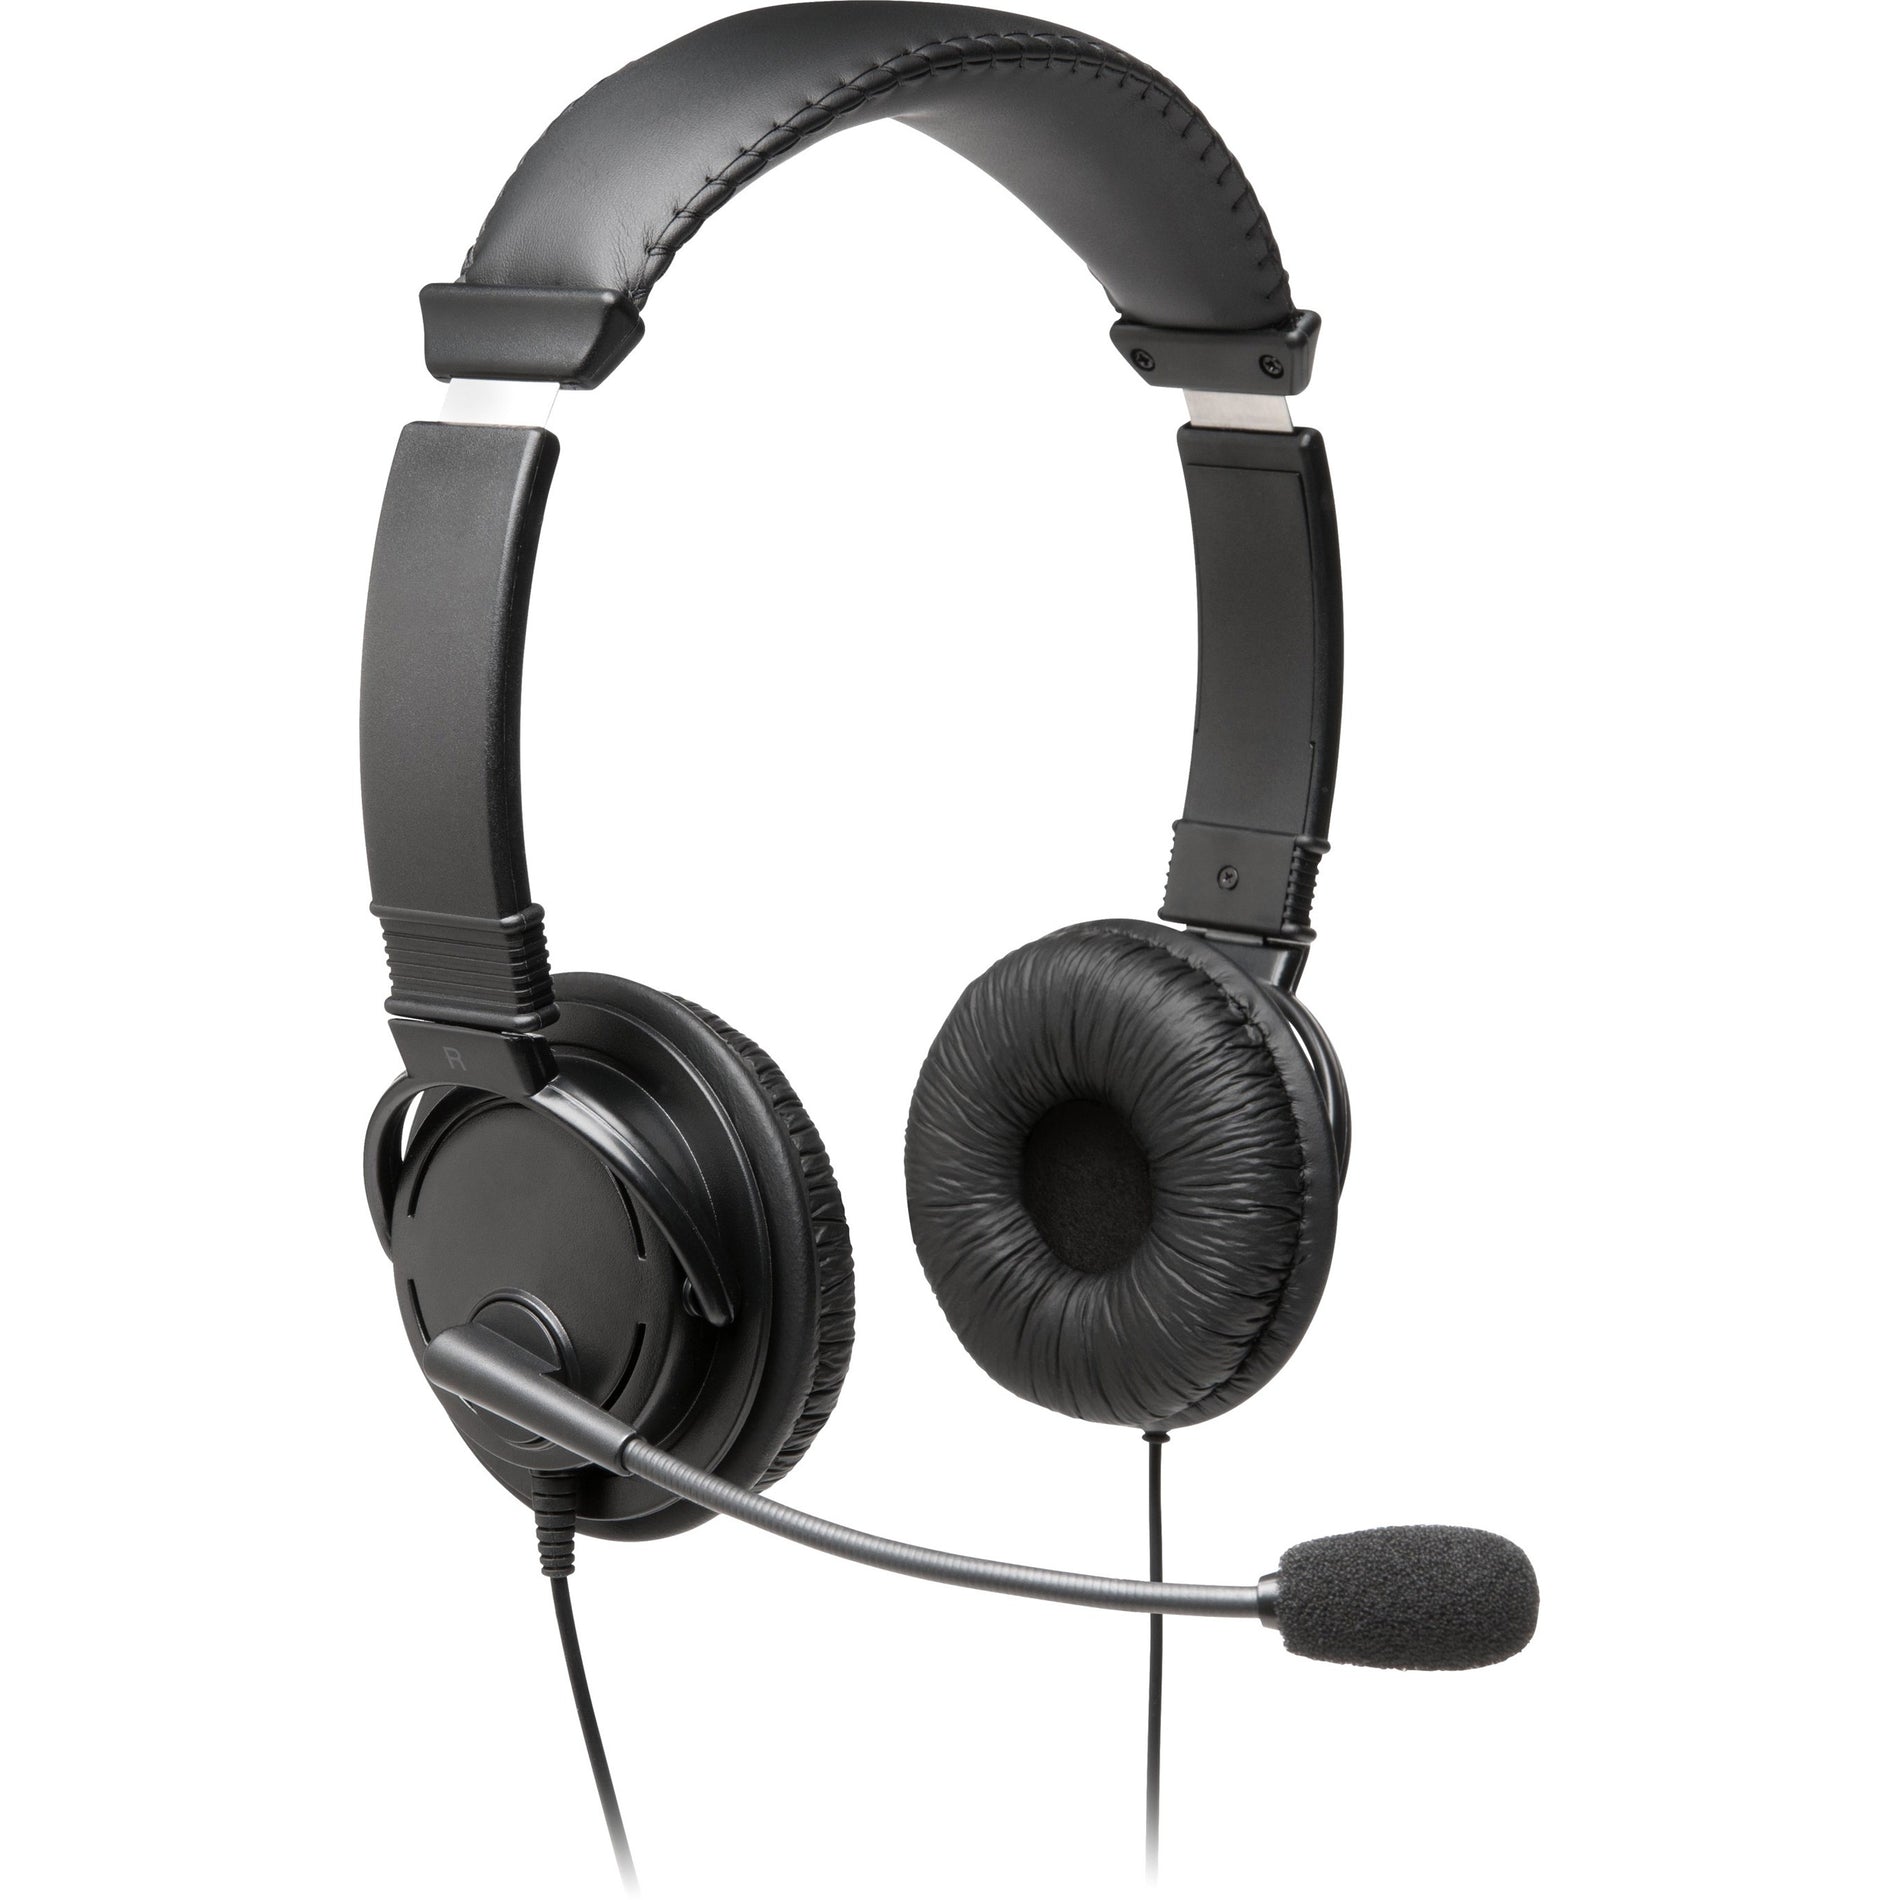 Kensington K97601WW Classic USB-A Headset with Mic, Comfortable, Noise Cancelling, 6 ft Cable